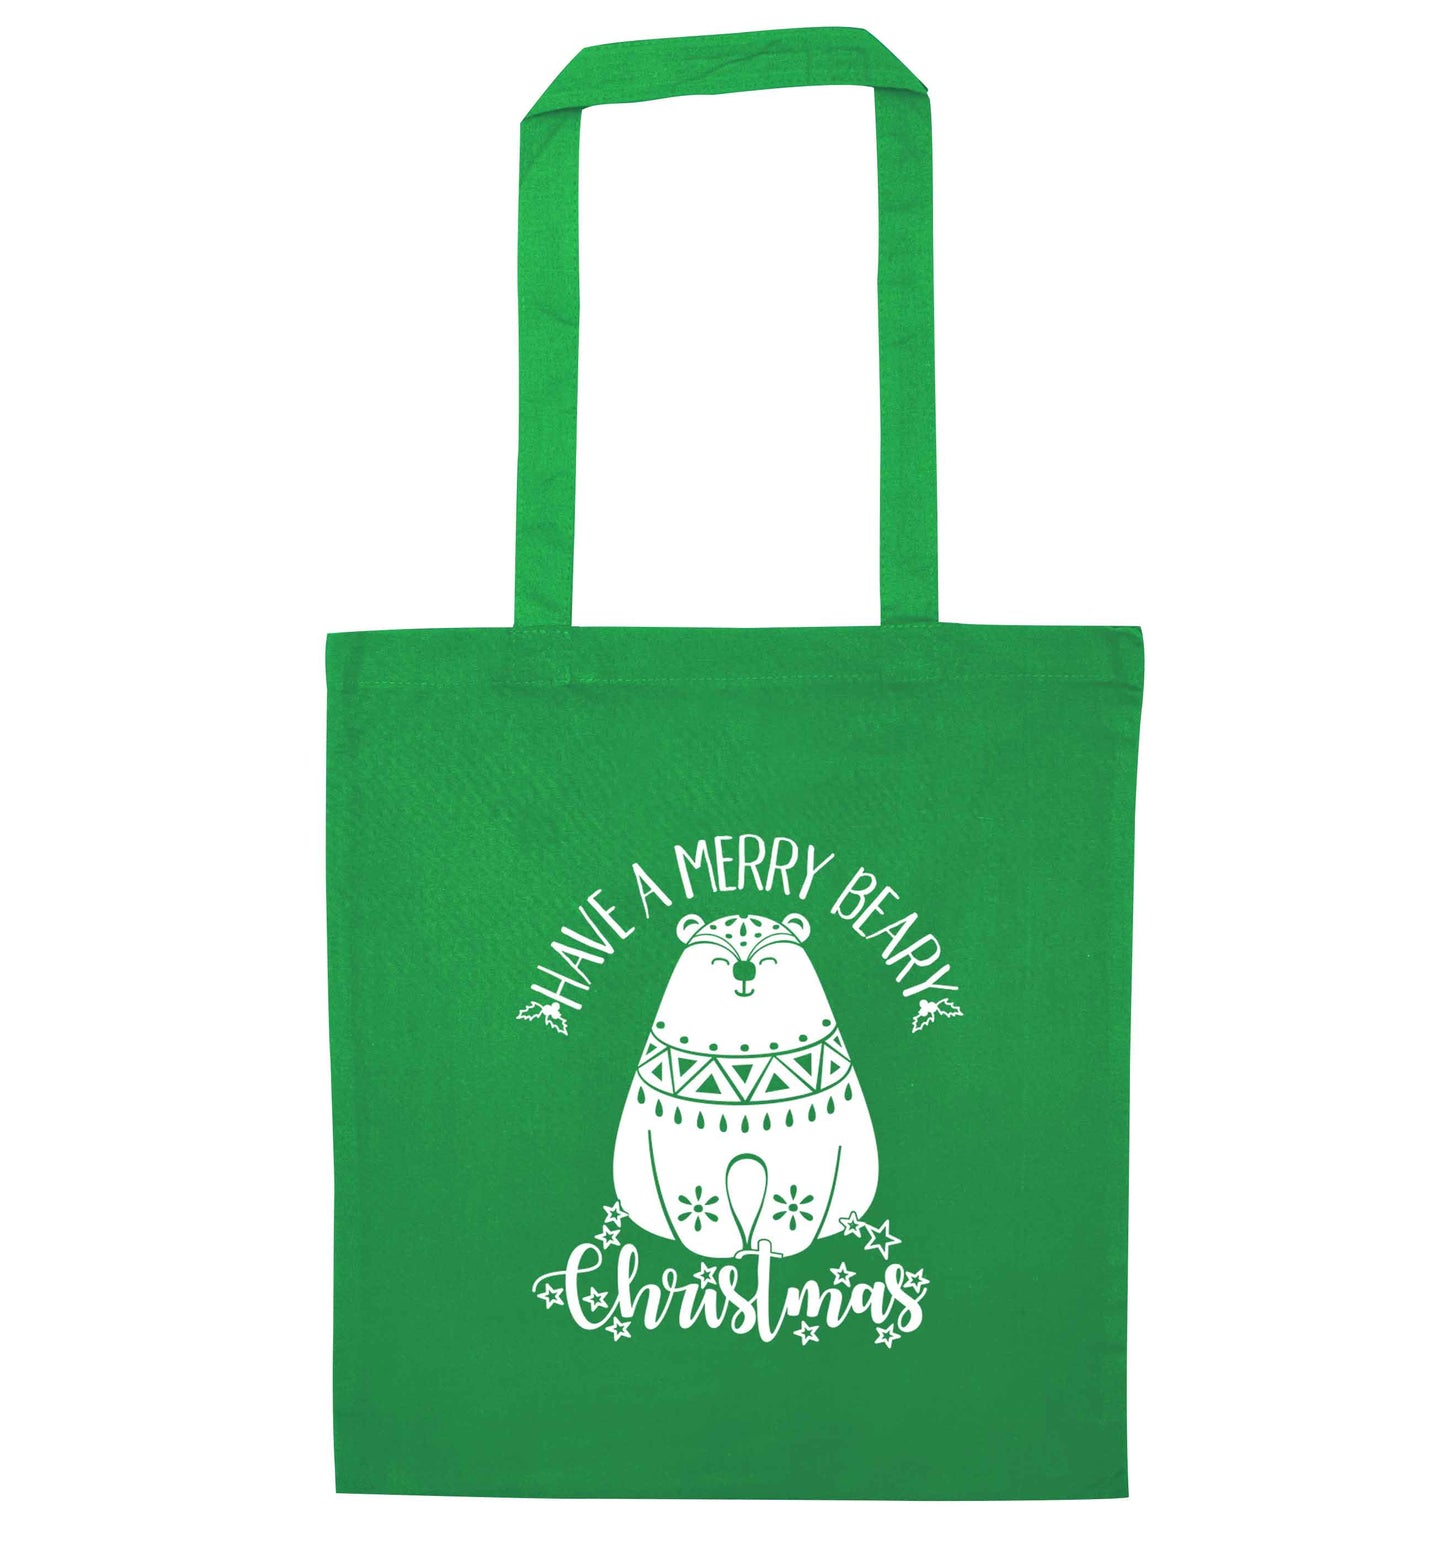 Have a merry beary Christmas green tote bag